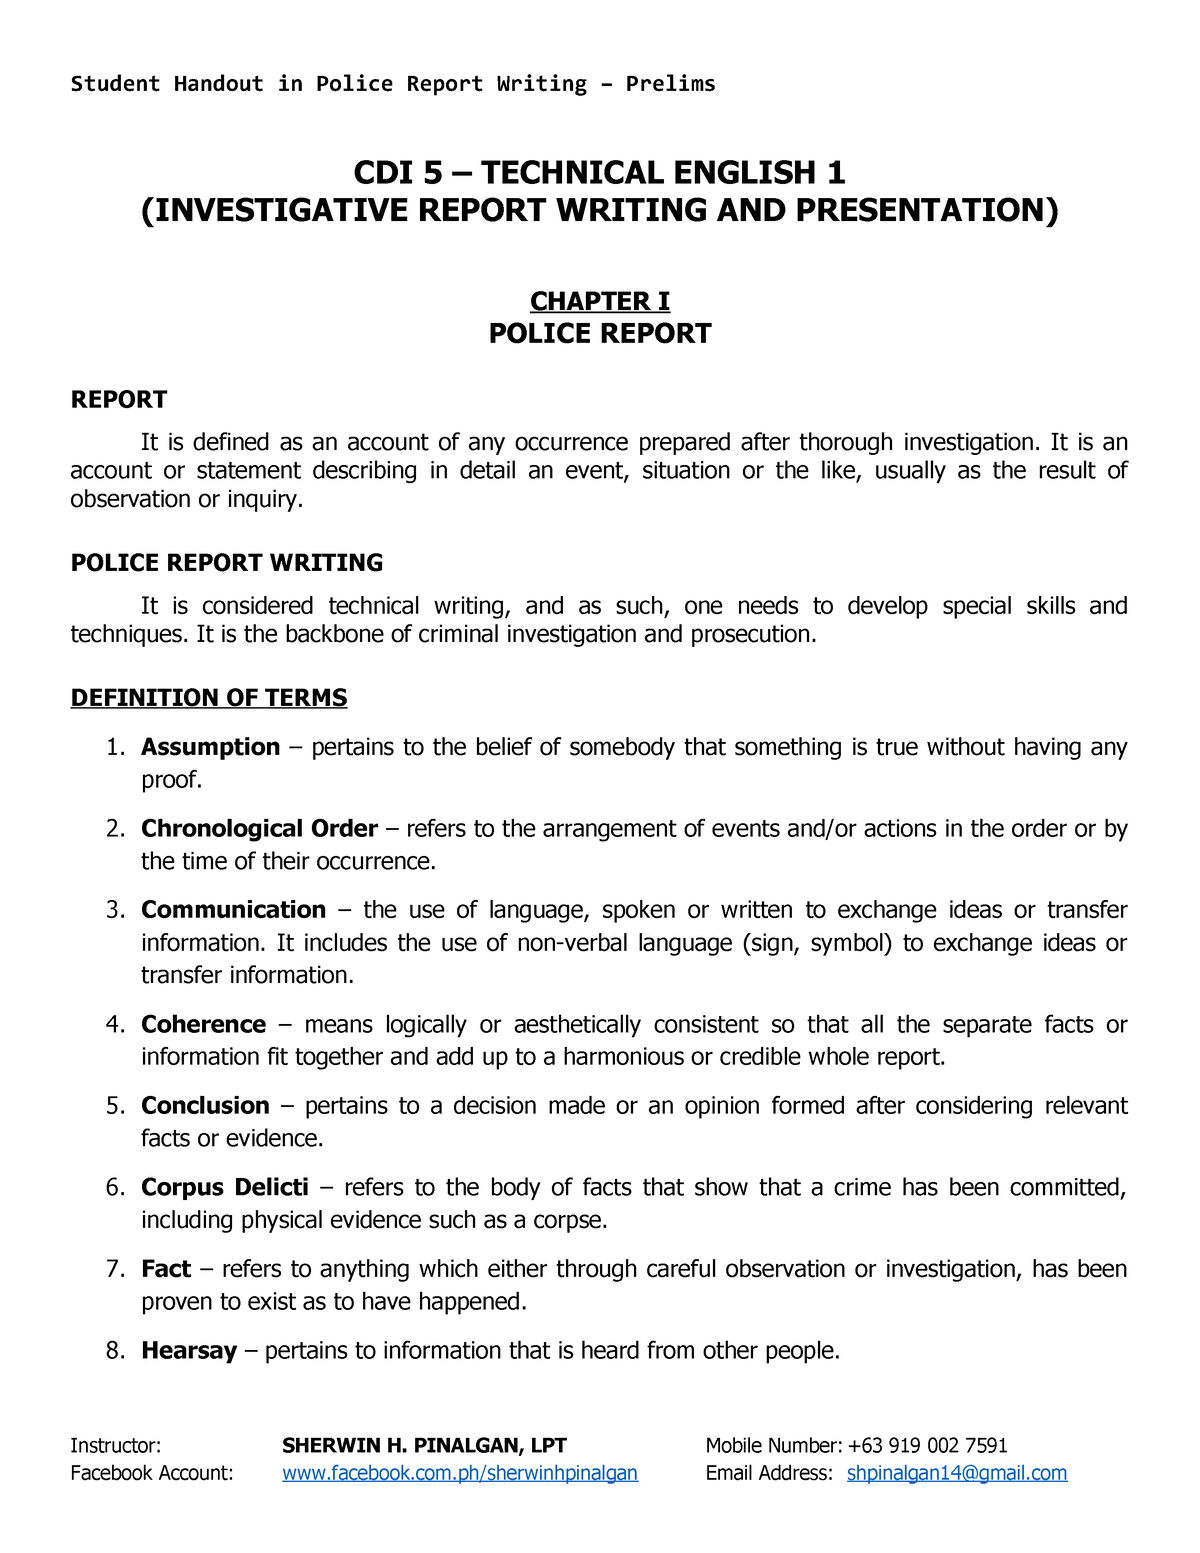 technical english investigative report writing and presentation